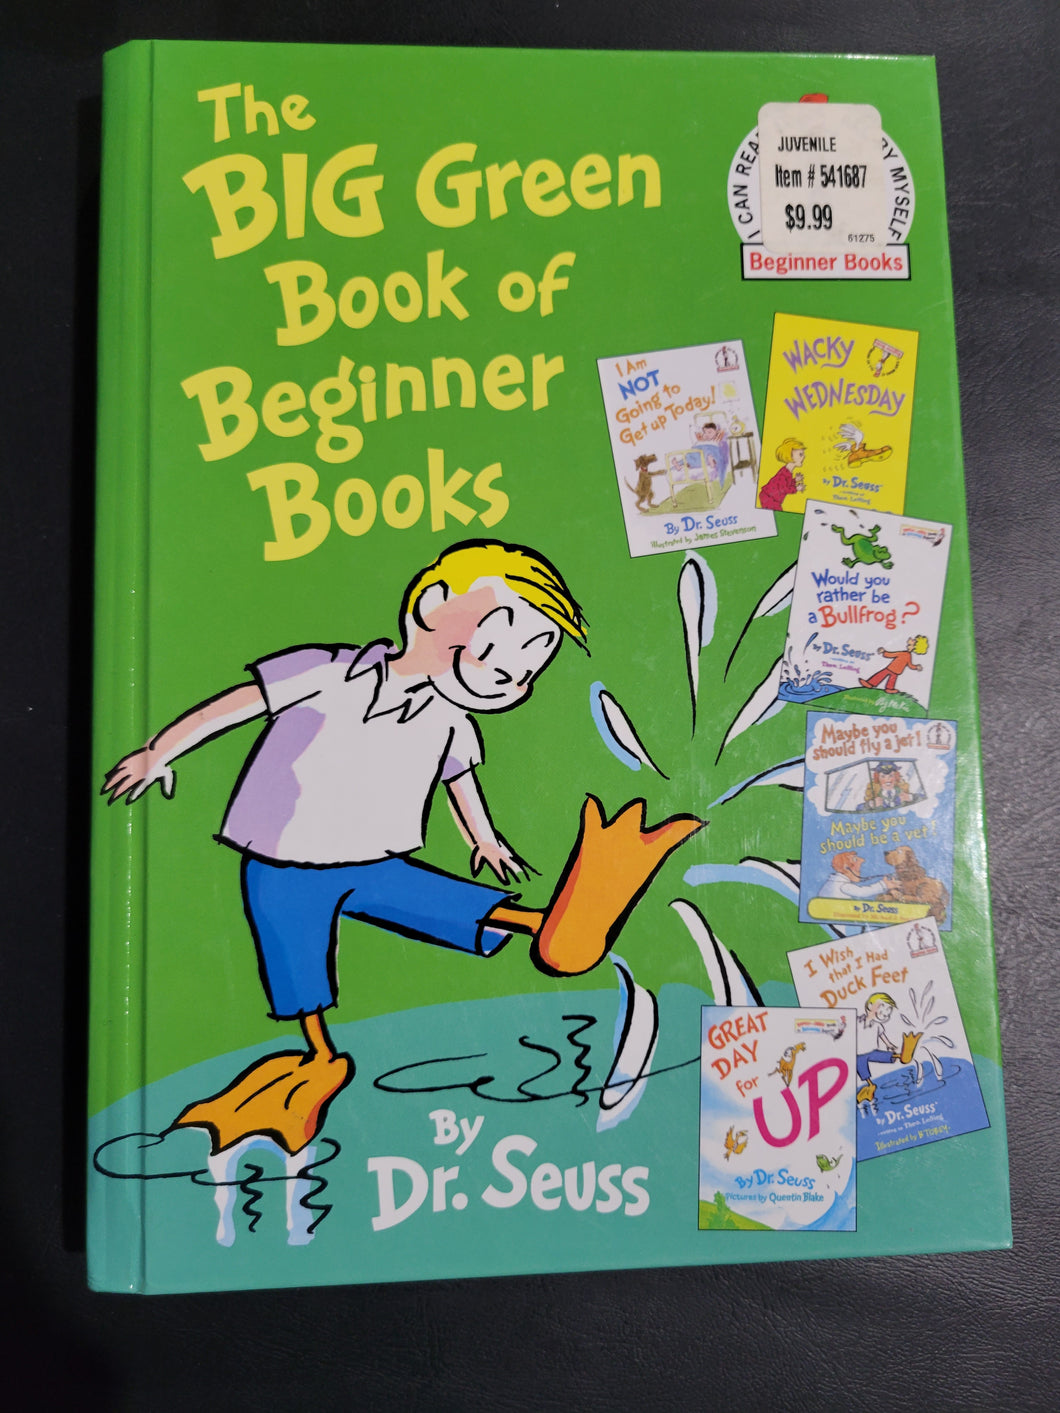 The Big Green Book of Beginner Books by Dr. Seuss